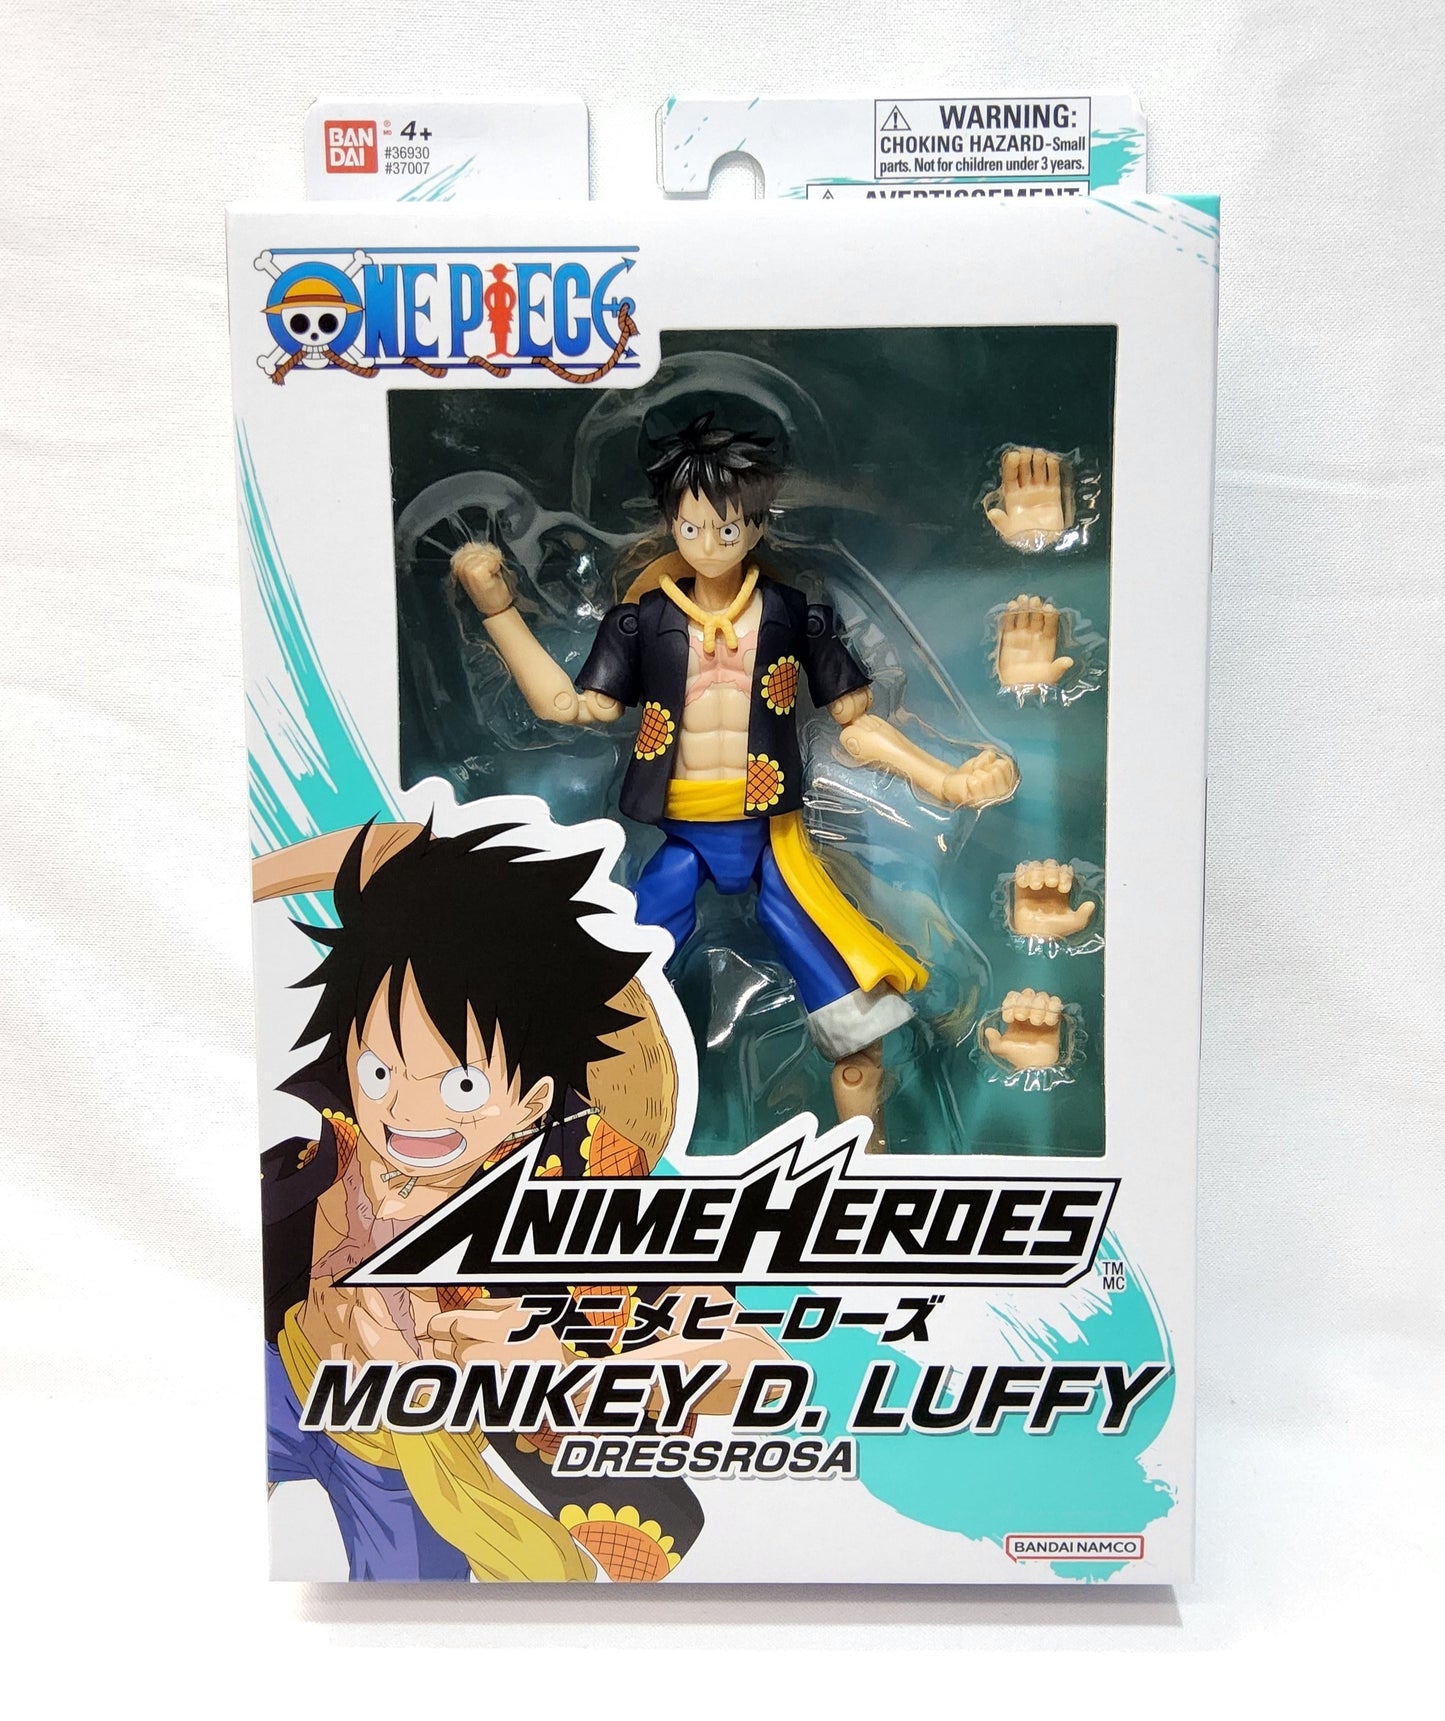 ANIME HEROES One Piece Monkey D. Luffy Dressrosa Action Figure